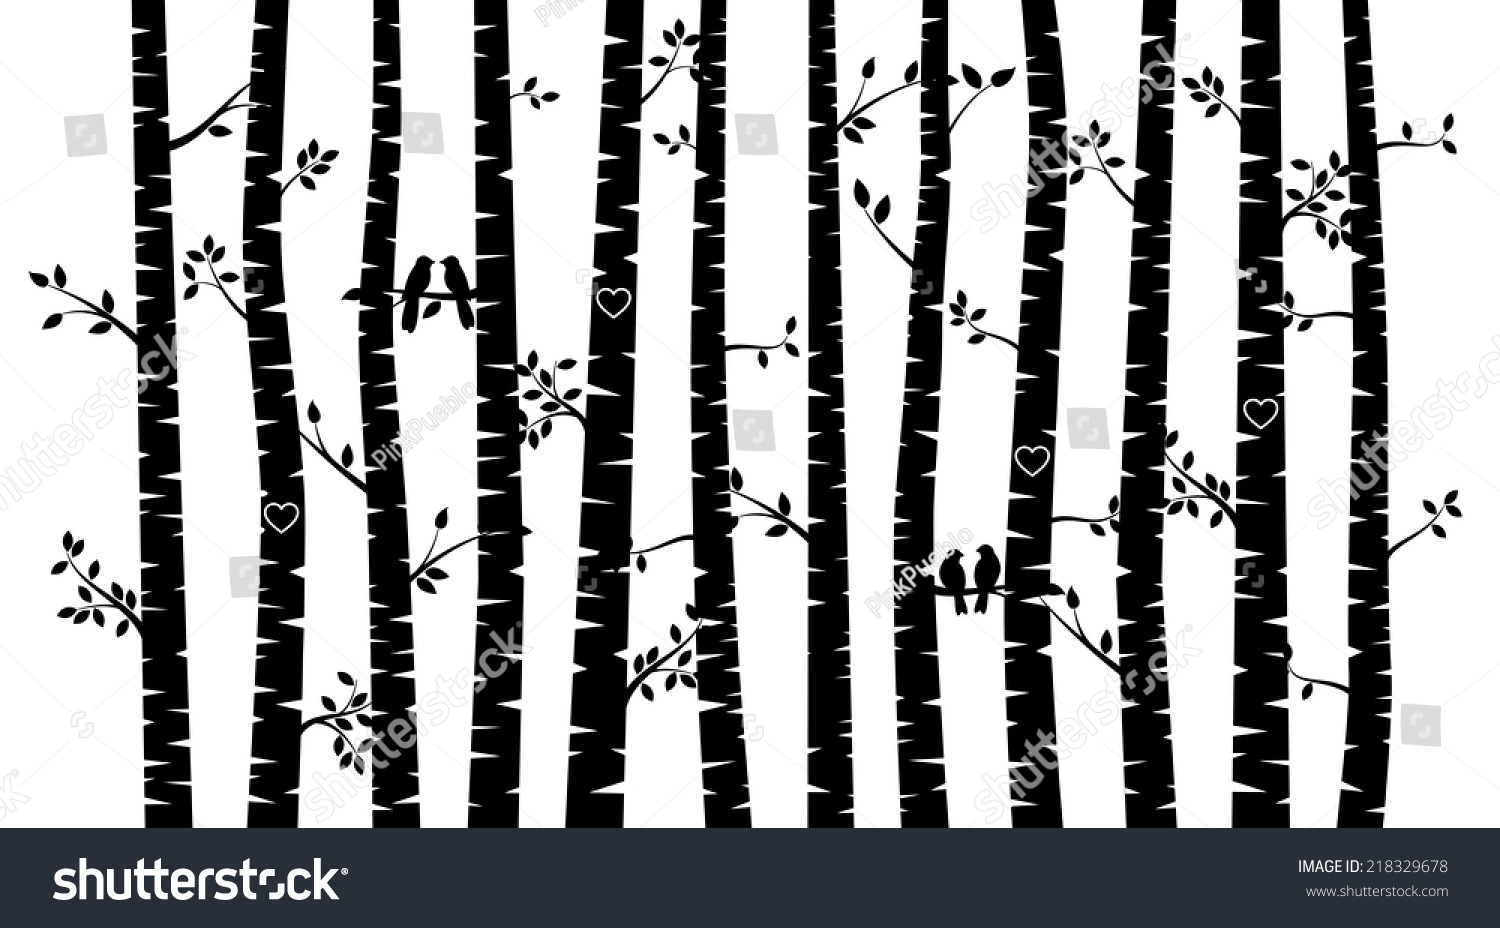 SVG of Black and White Vector Birch Tree Silhouette Background with Birds svg